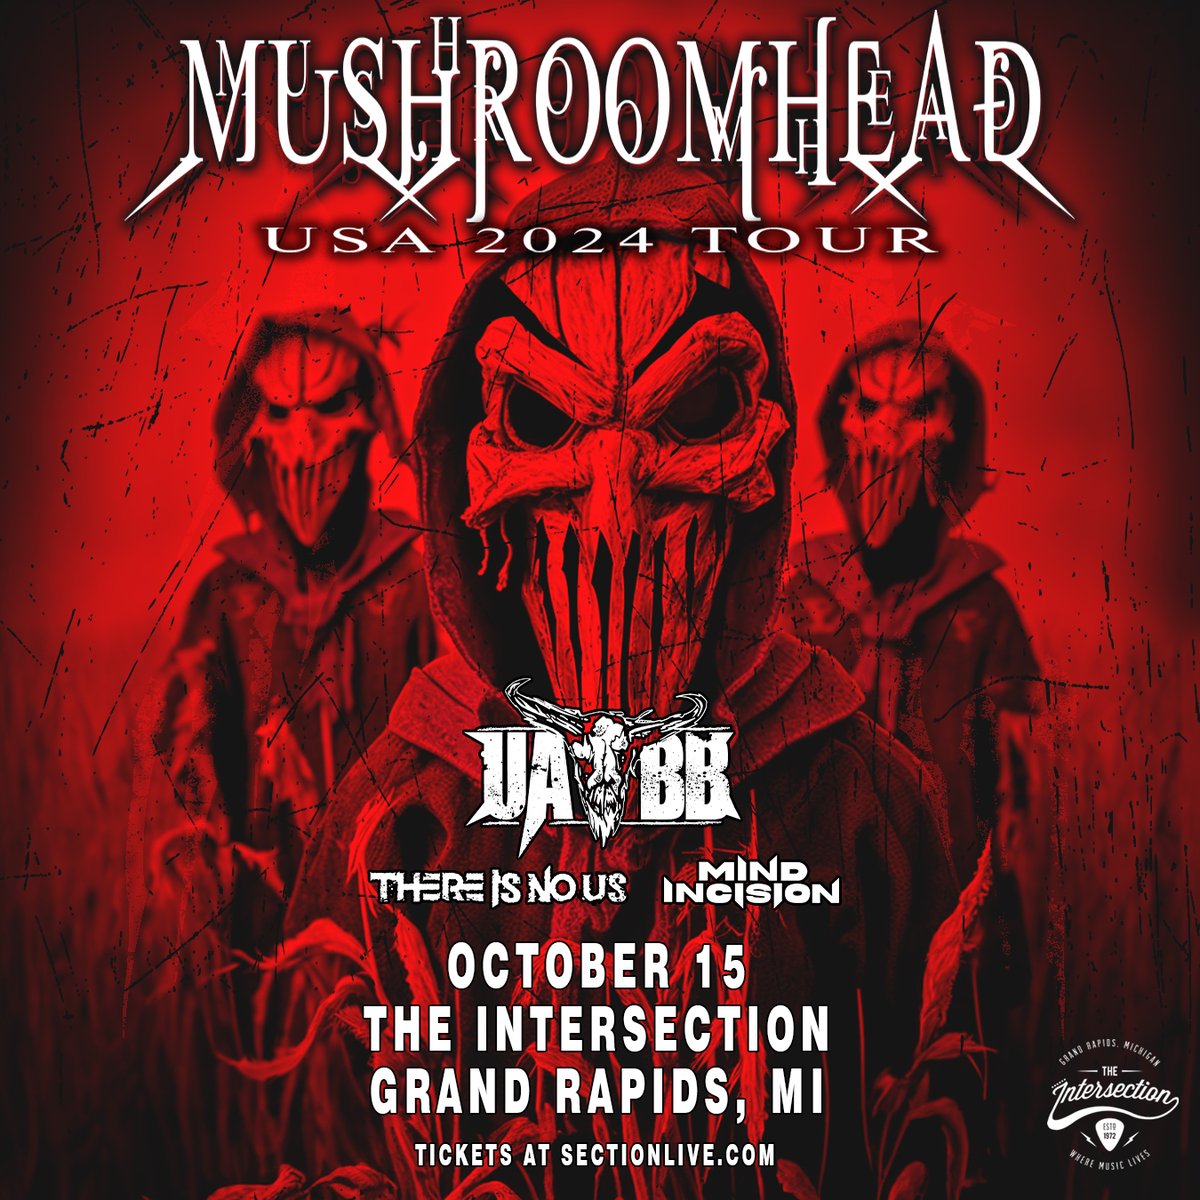 On Sale - @mushroomhead USA 2024 Tour with @UABB @ThereIsNoUsband @MindIncision at The Intersection on 10/15 Tickets at sectionlive.com